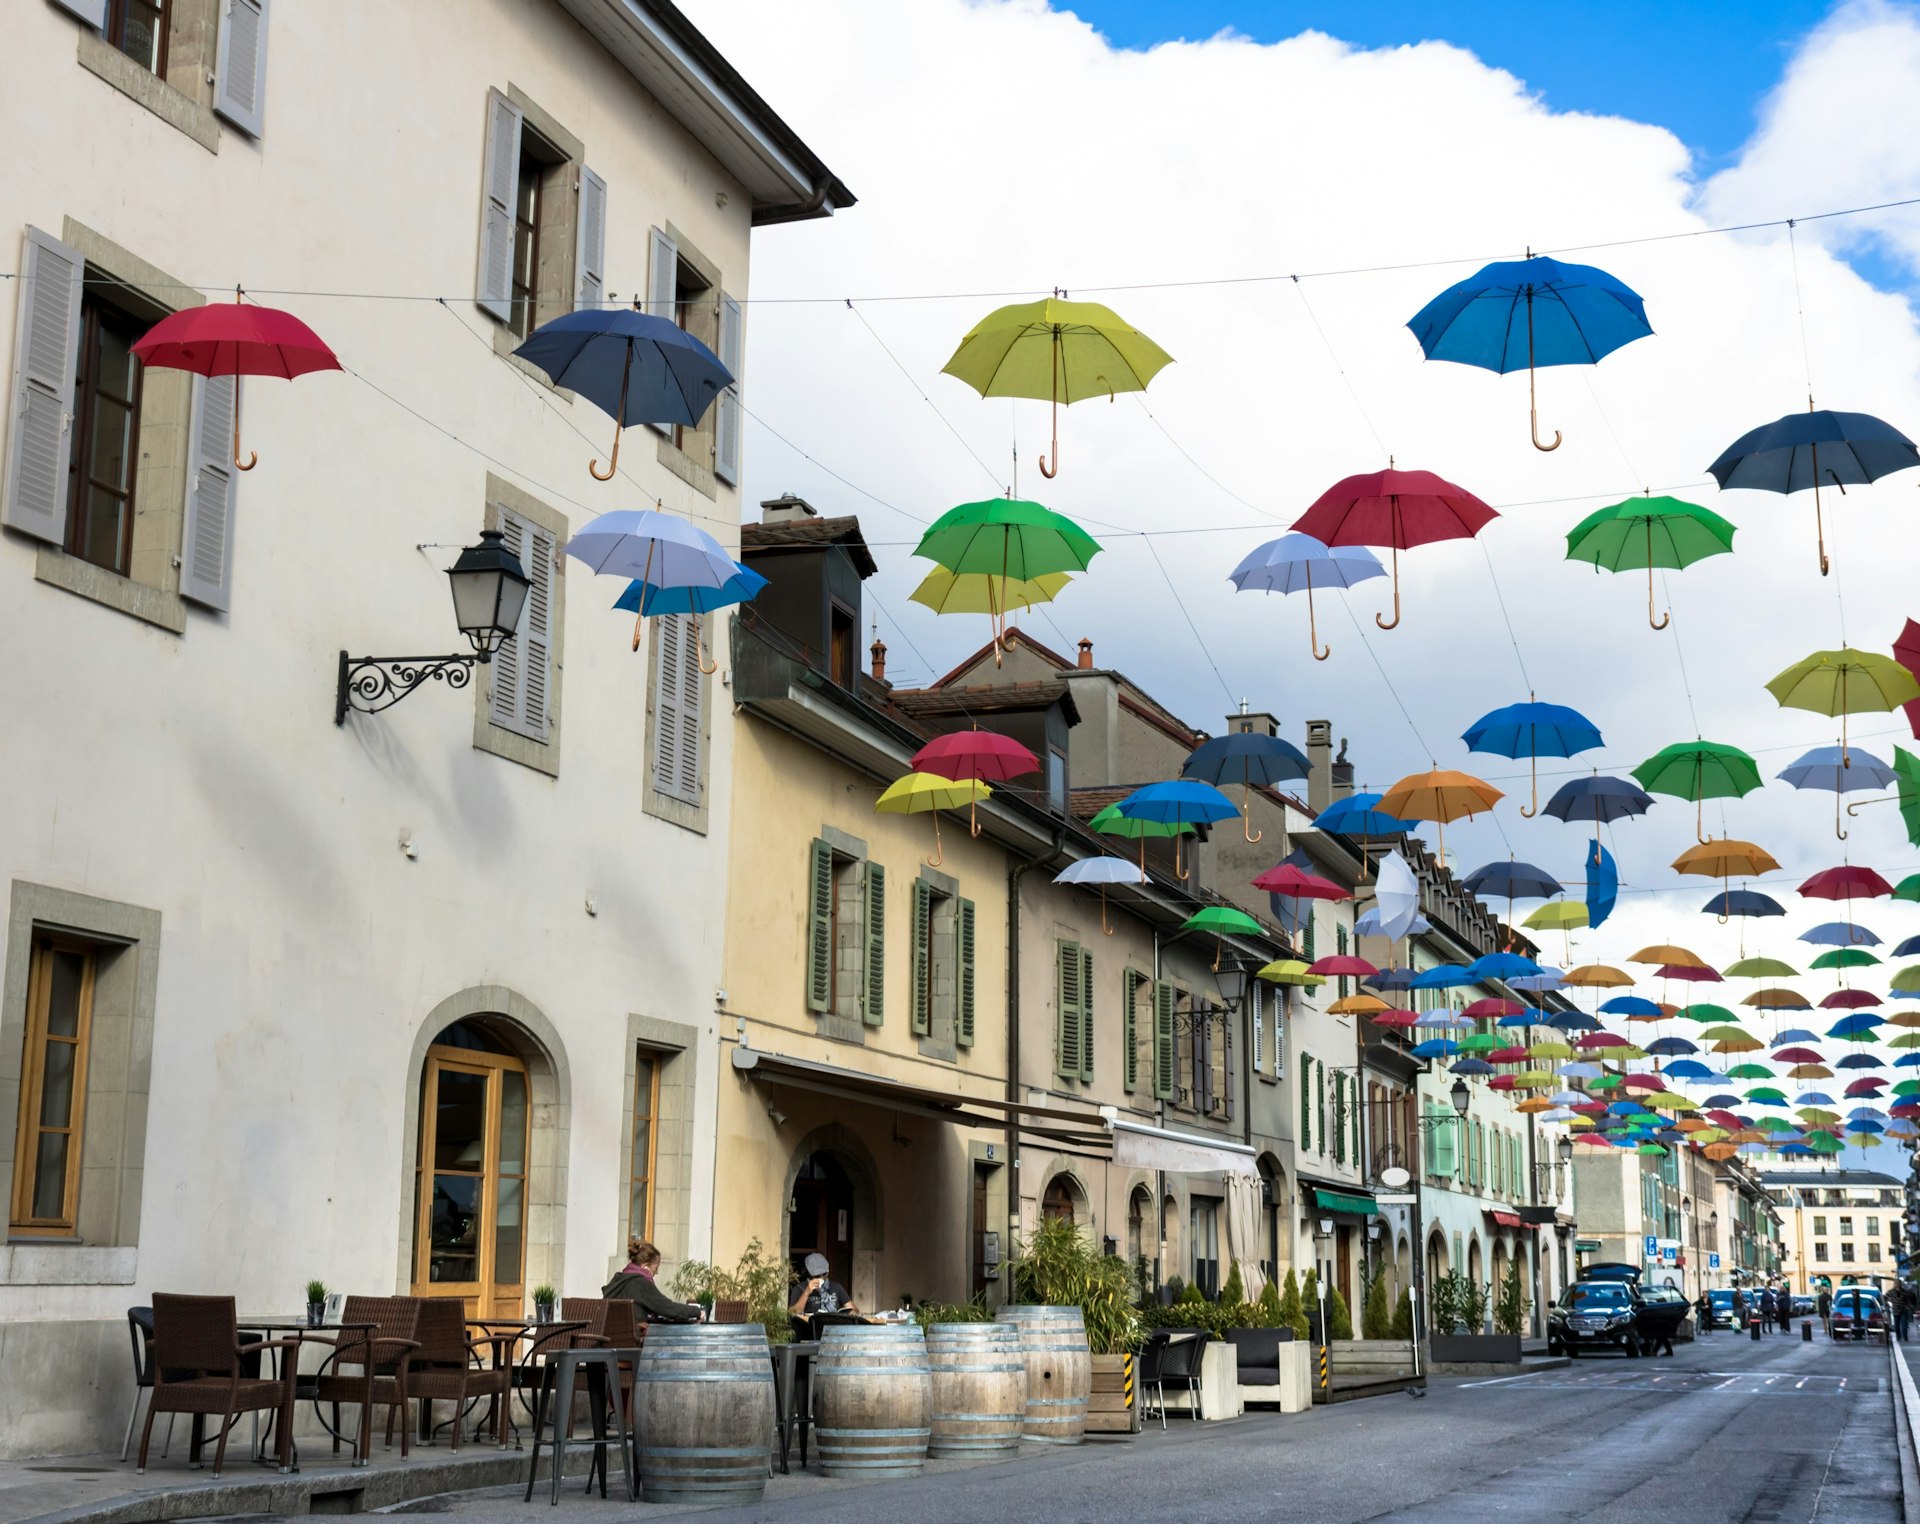 Multicolored umbrellas hang from wires above the street in the Carouge area, Geneva